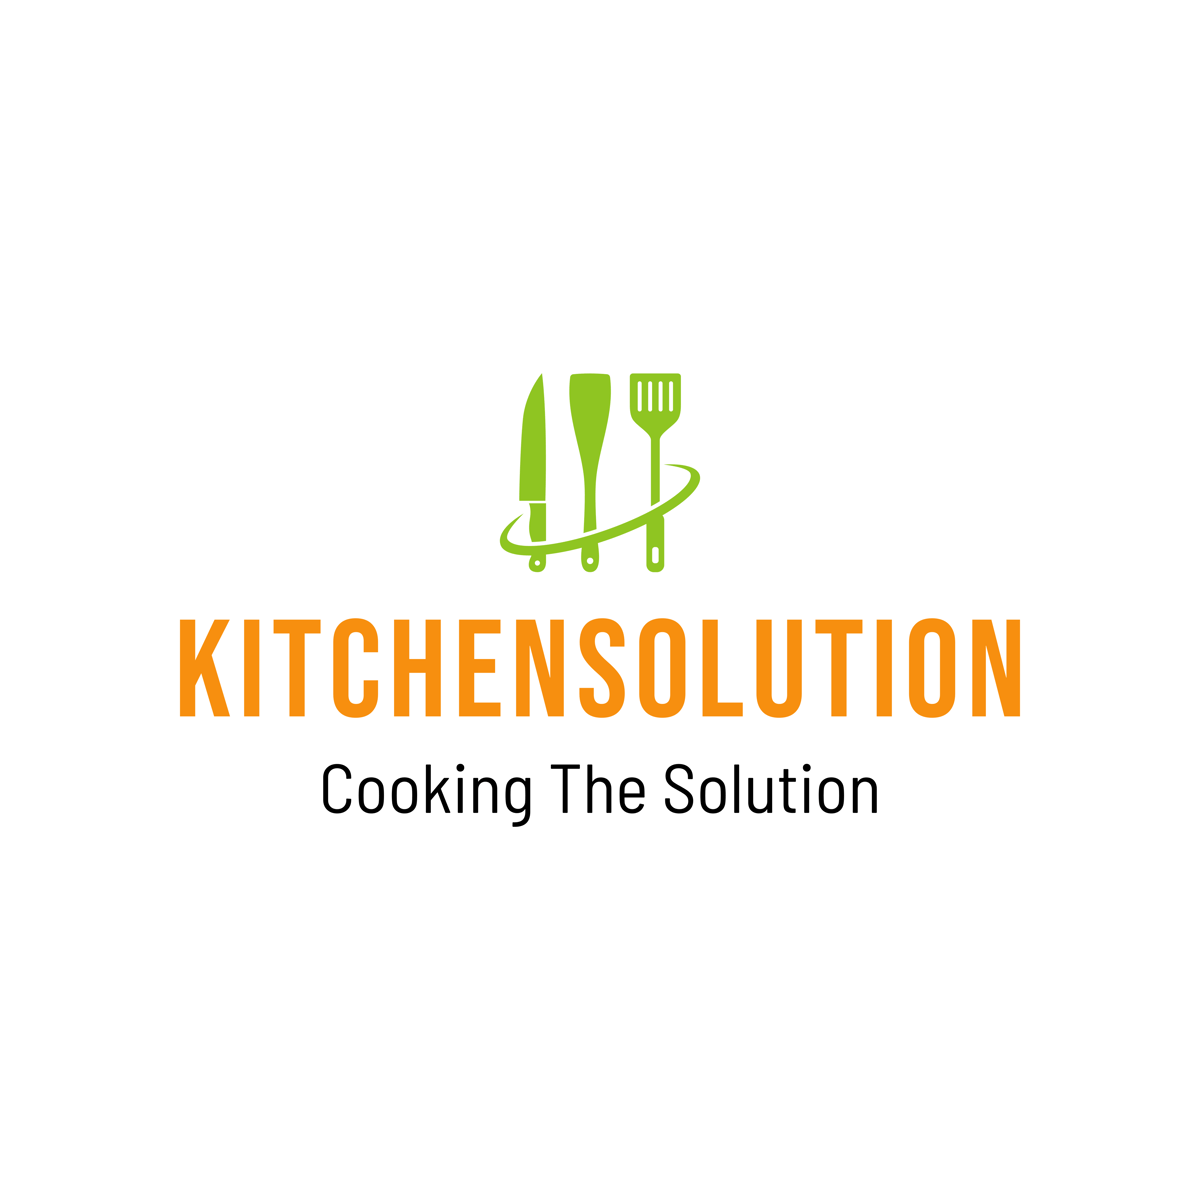 Home | KitchenSolution